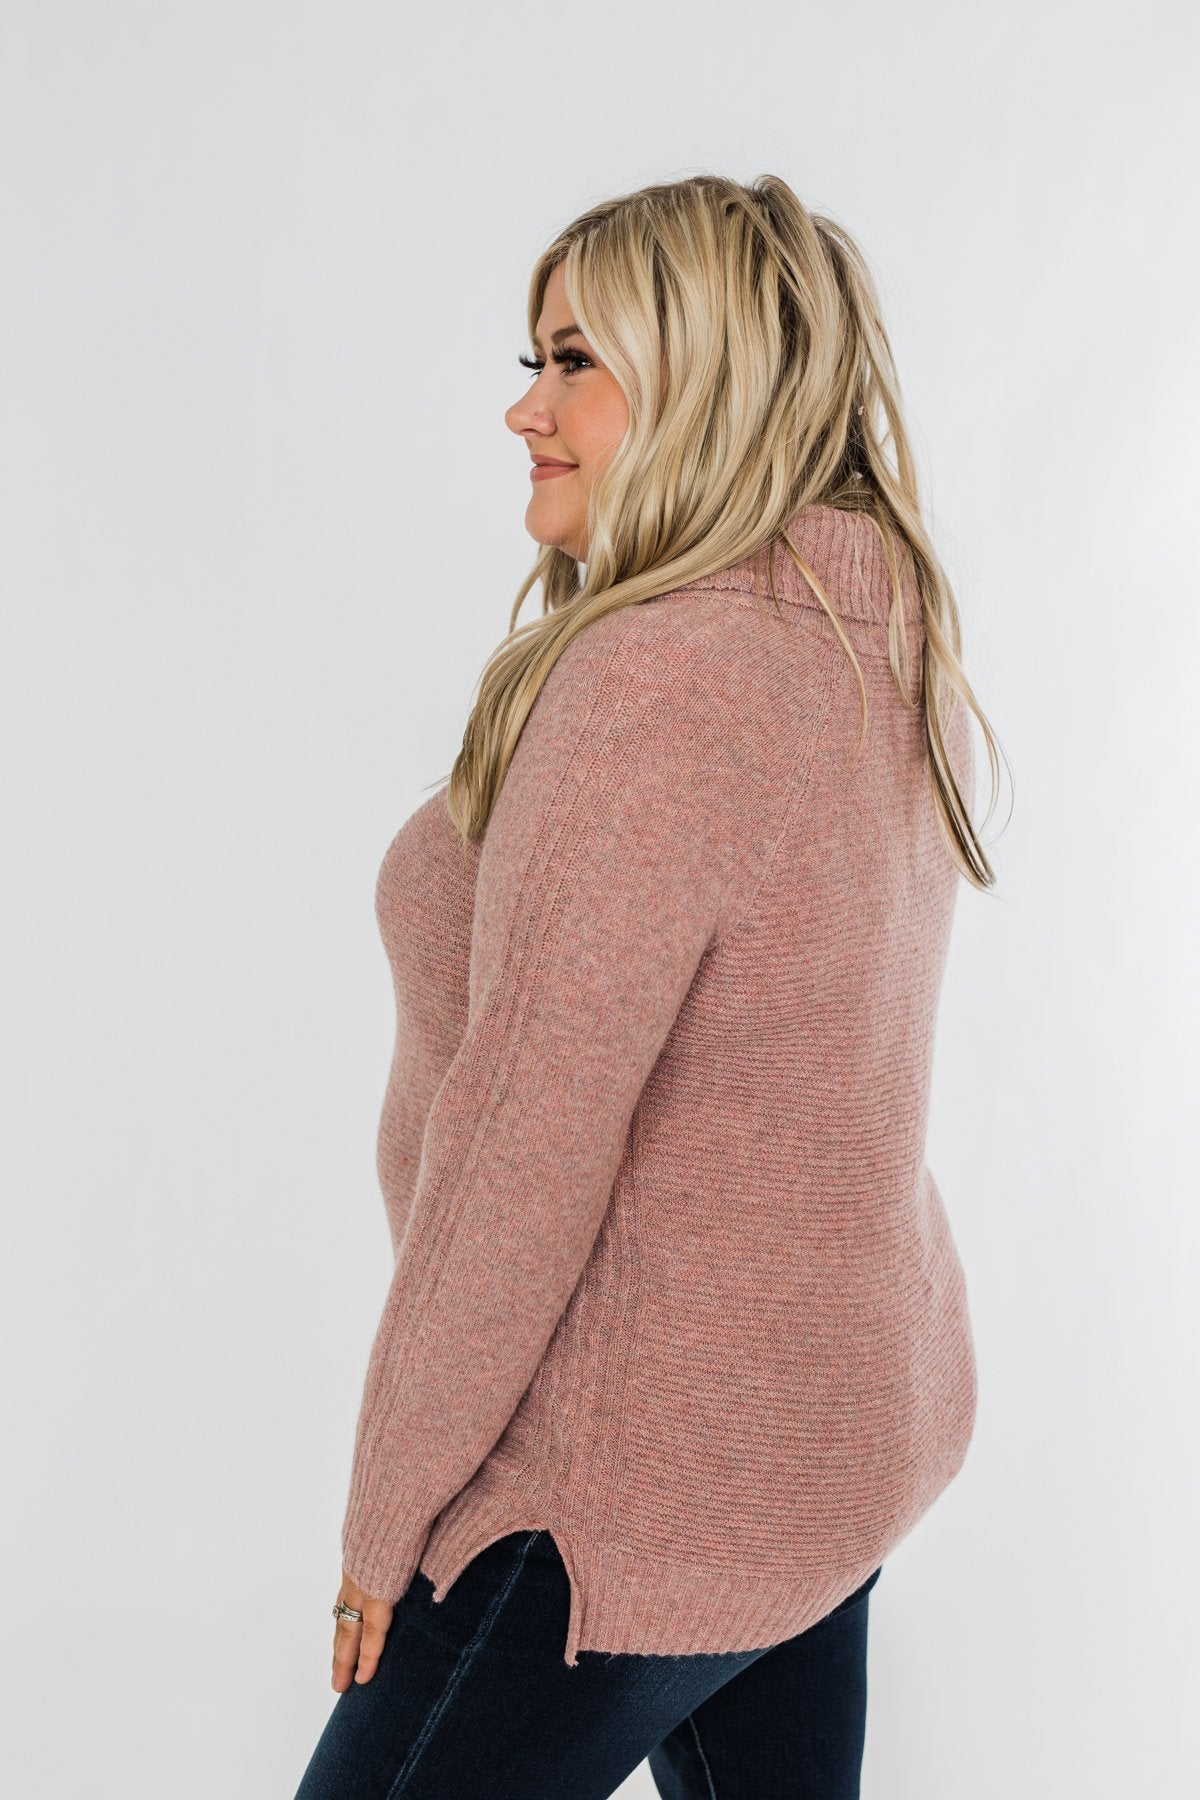 Oh Darling Cowl Neck Sweater- Dusty Mauve